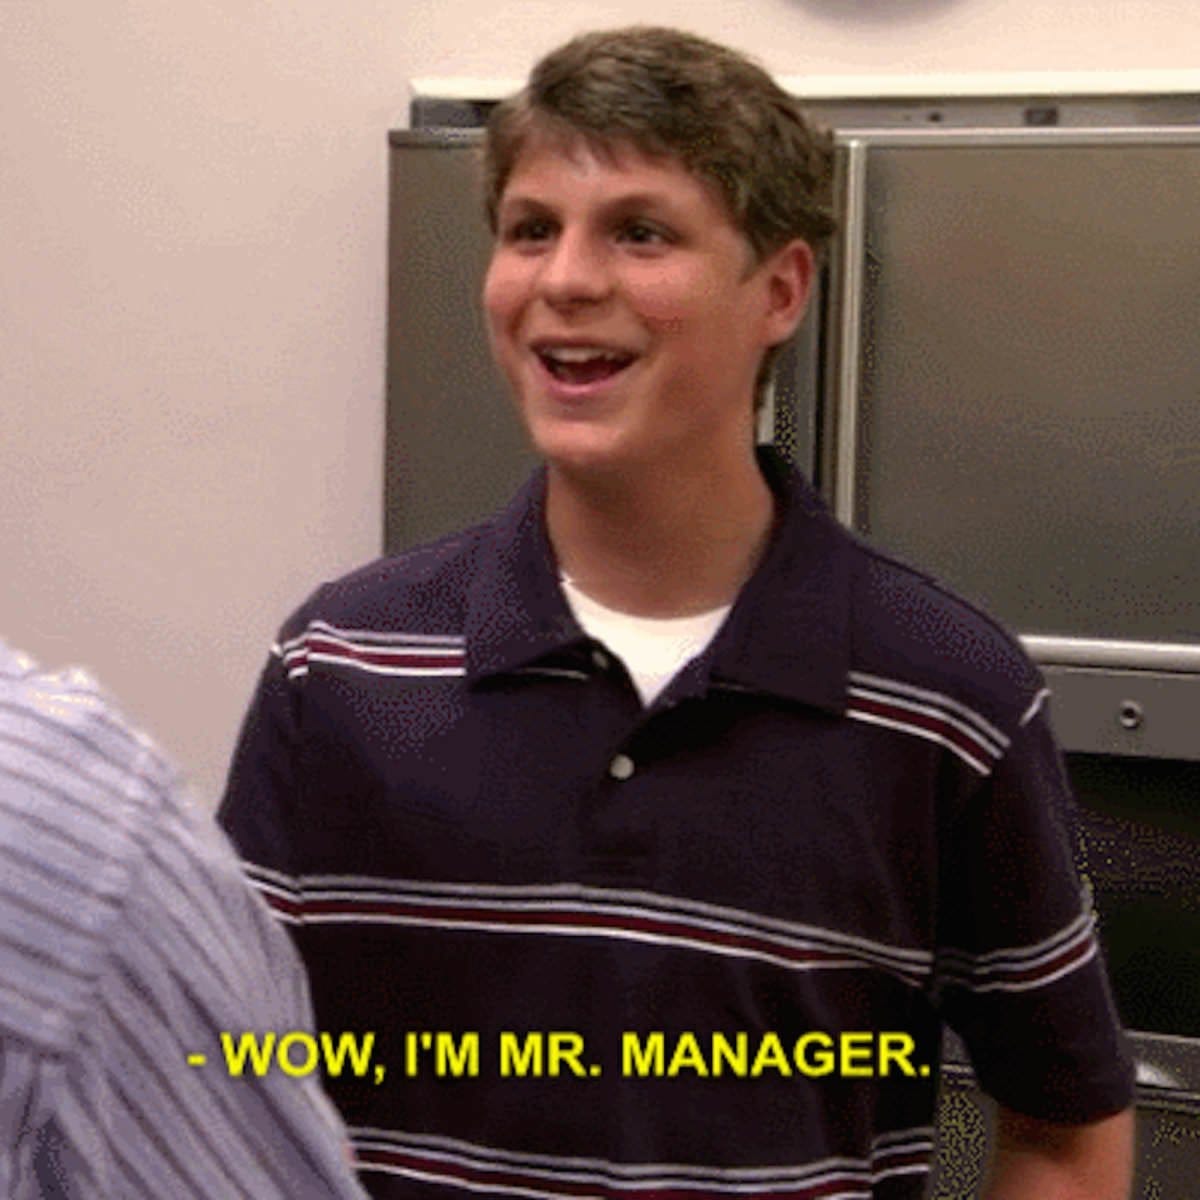 Chief Justice Roberts is actually addressing House Impeachment Managers as &quot; Mr. Manager&quot;: arresteddevelopment